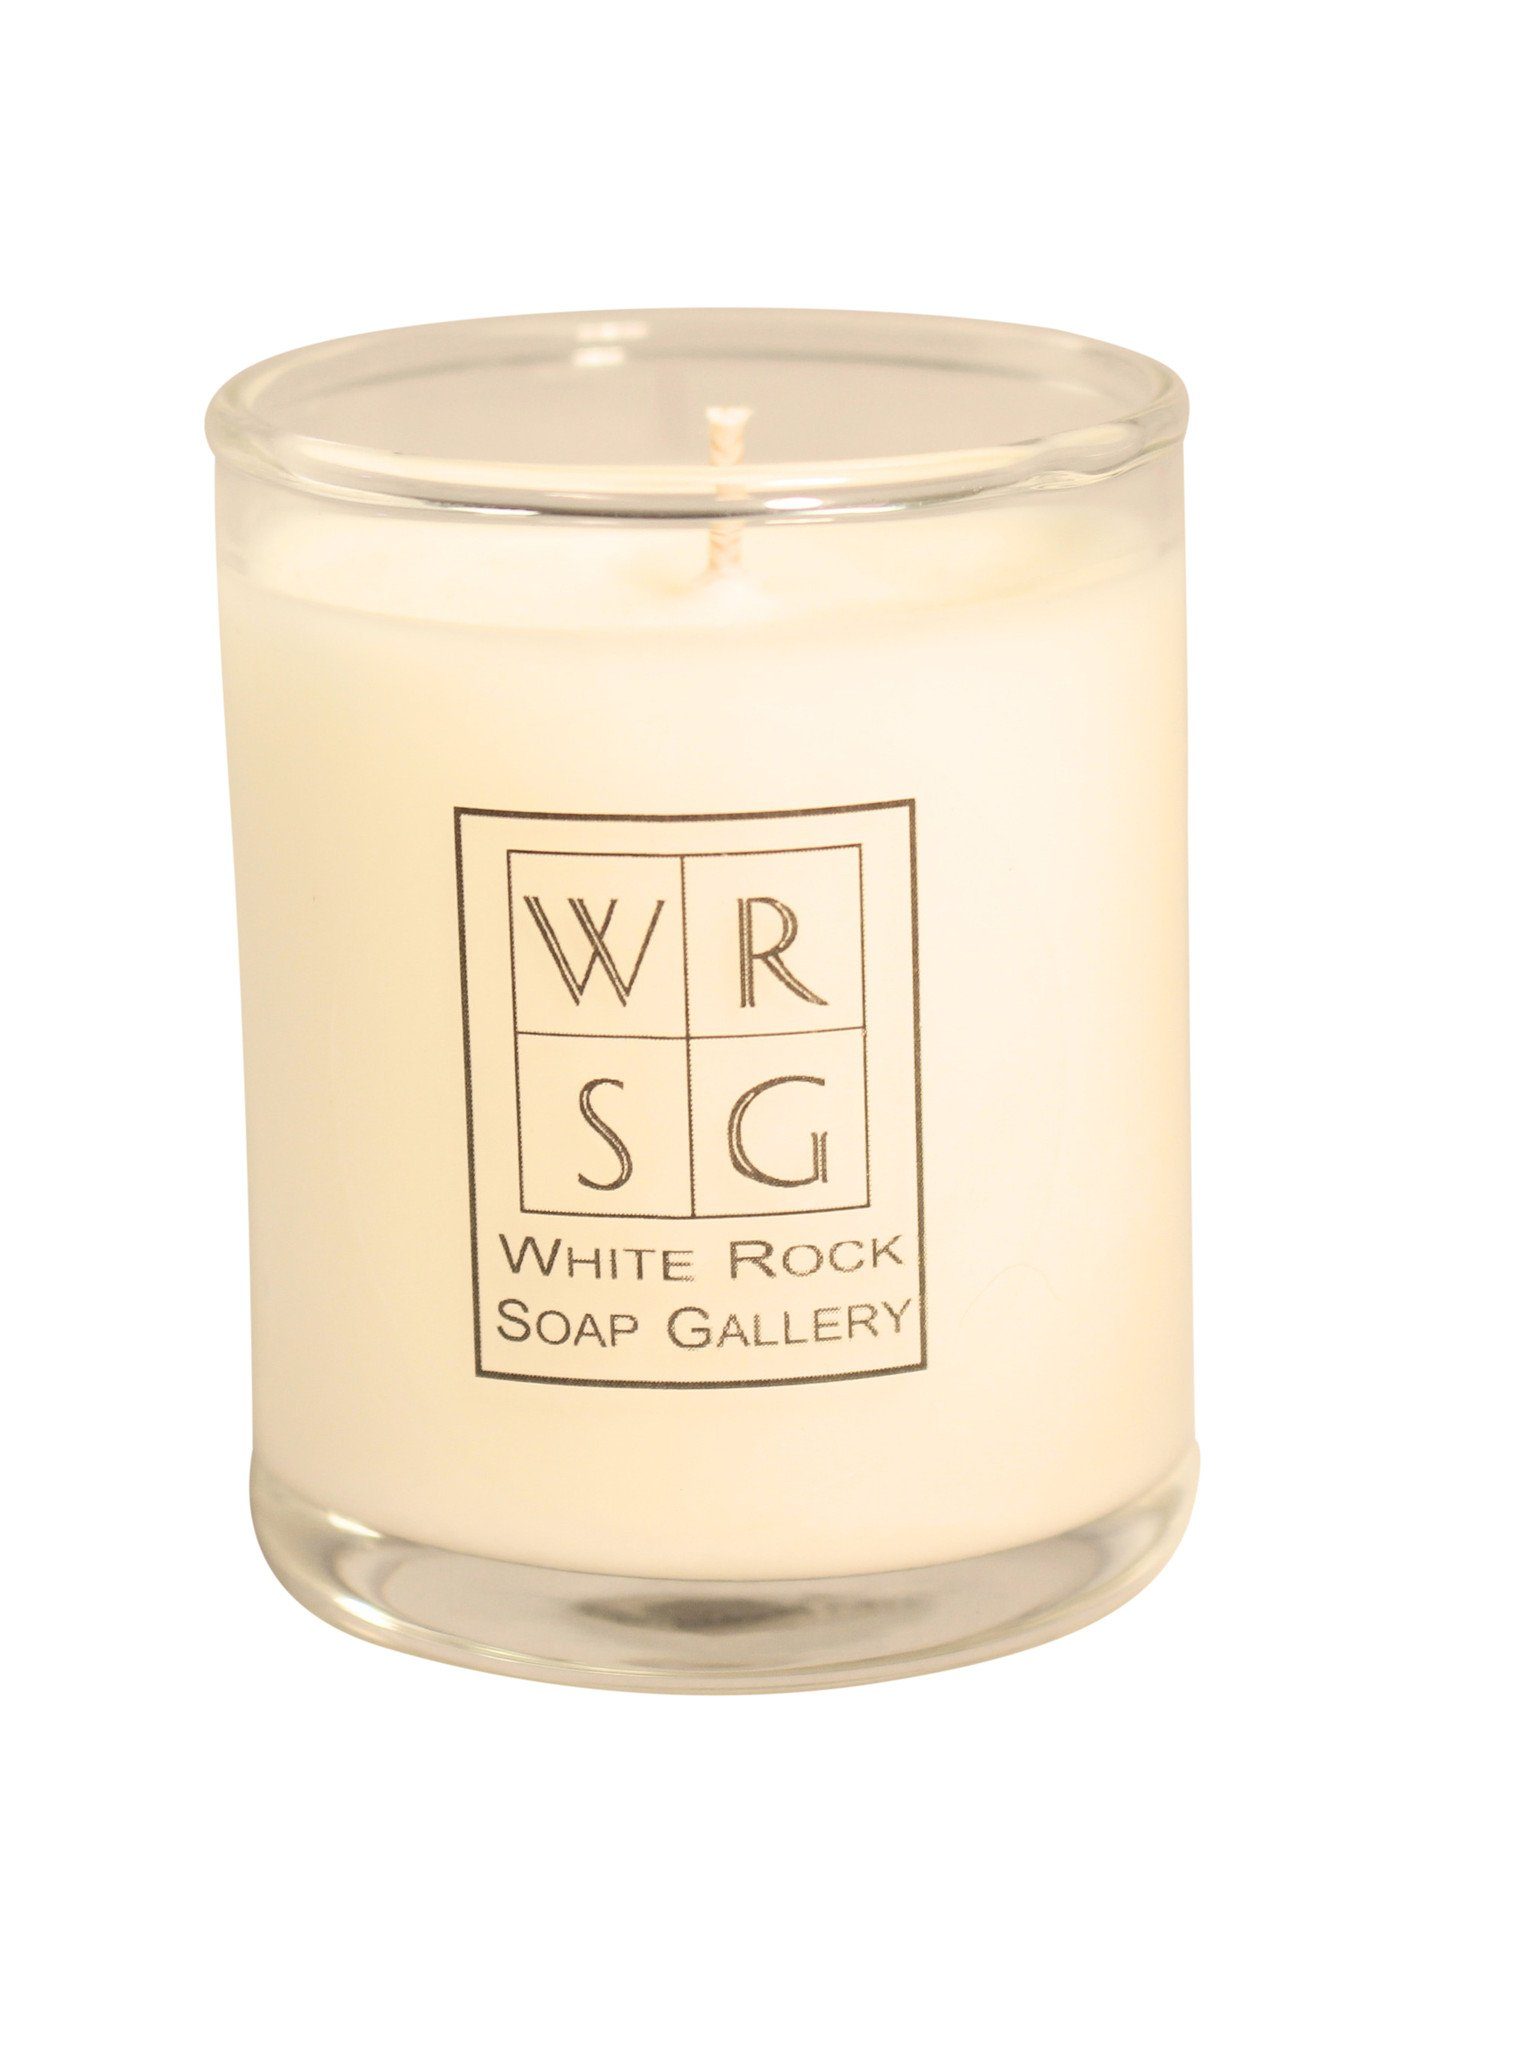 3.5 oz Votive Glass Soy Candle - White Rock Soap Gallery